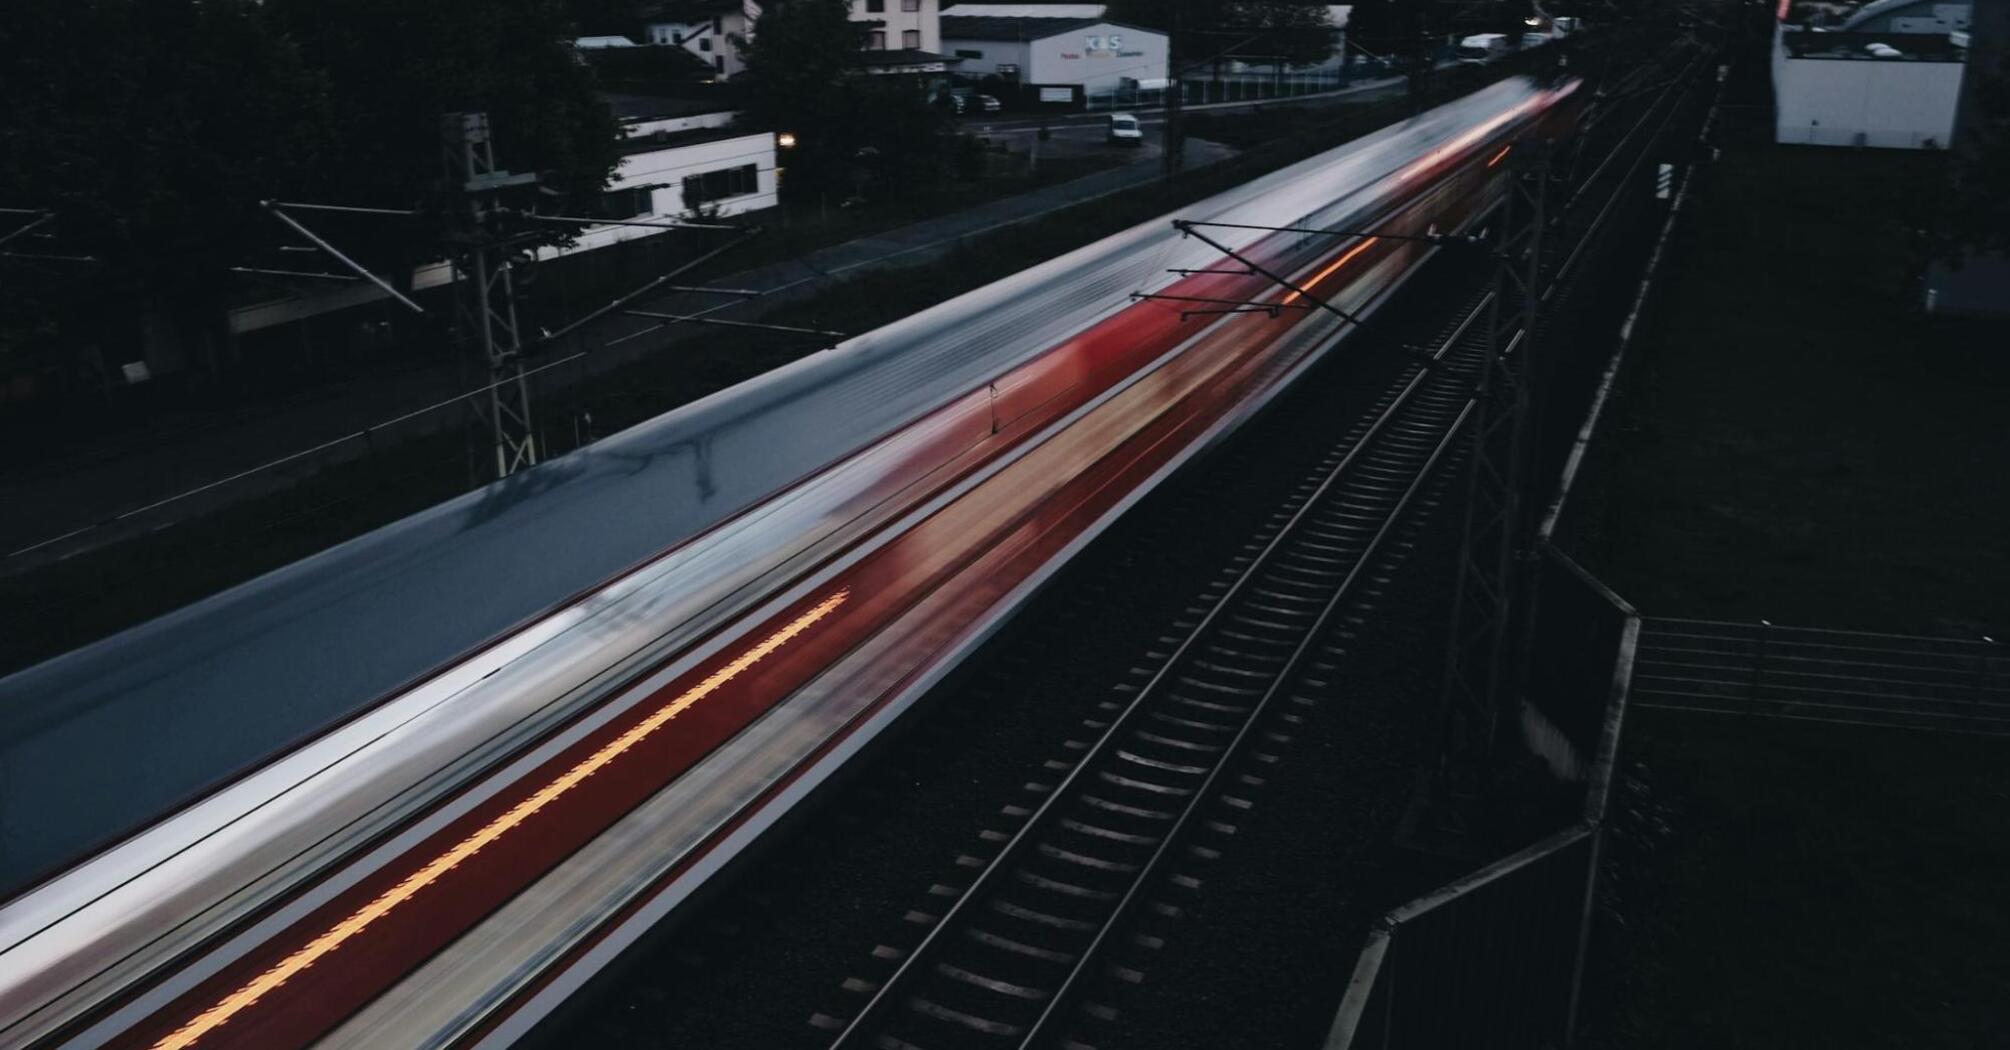 A train passing through a station at dusk